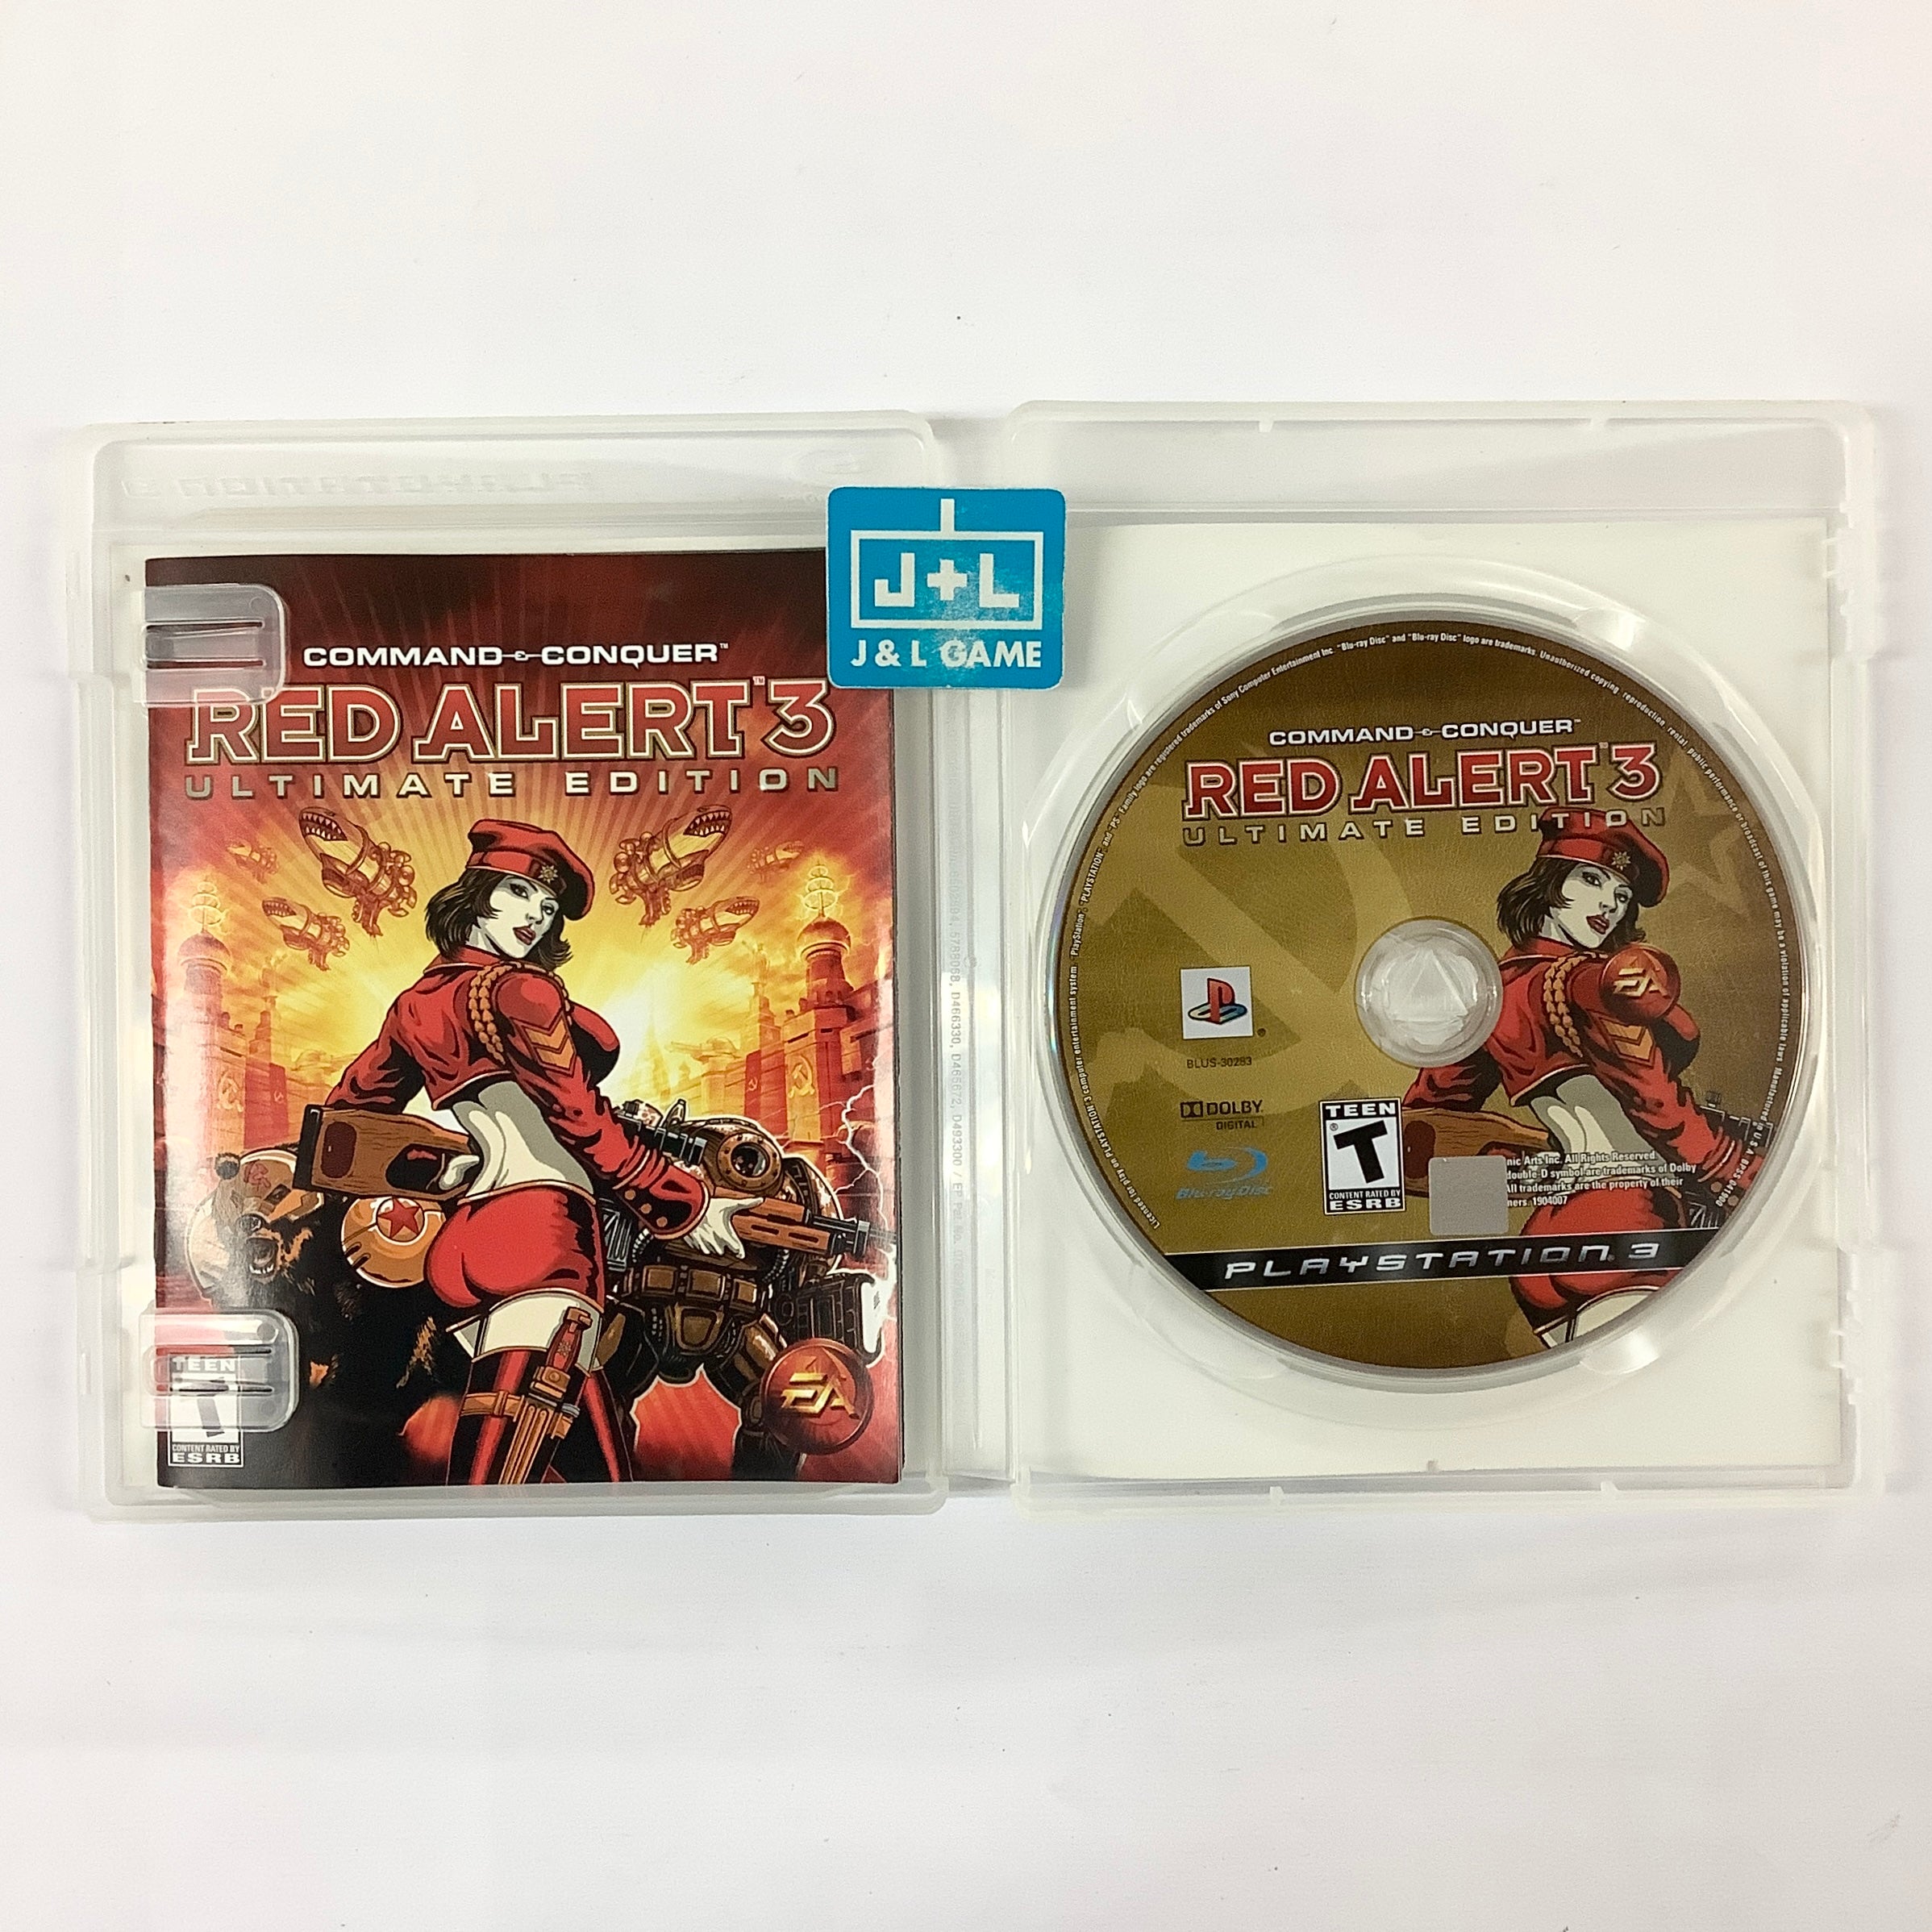 Command & Conquer: Red Alert 3 (Ultimate Edition) - (PS3) PlayStation 3 [Pre-Owned] Video Games Electronic Arts   